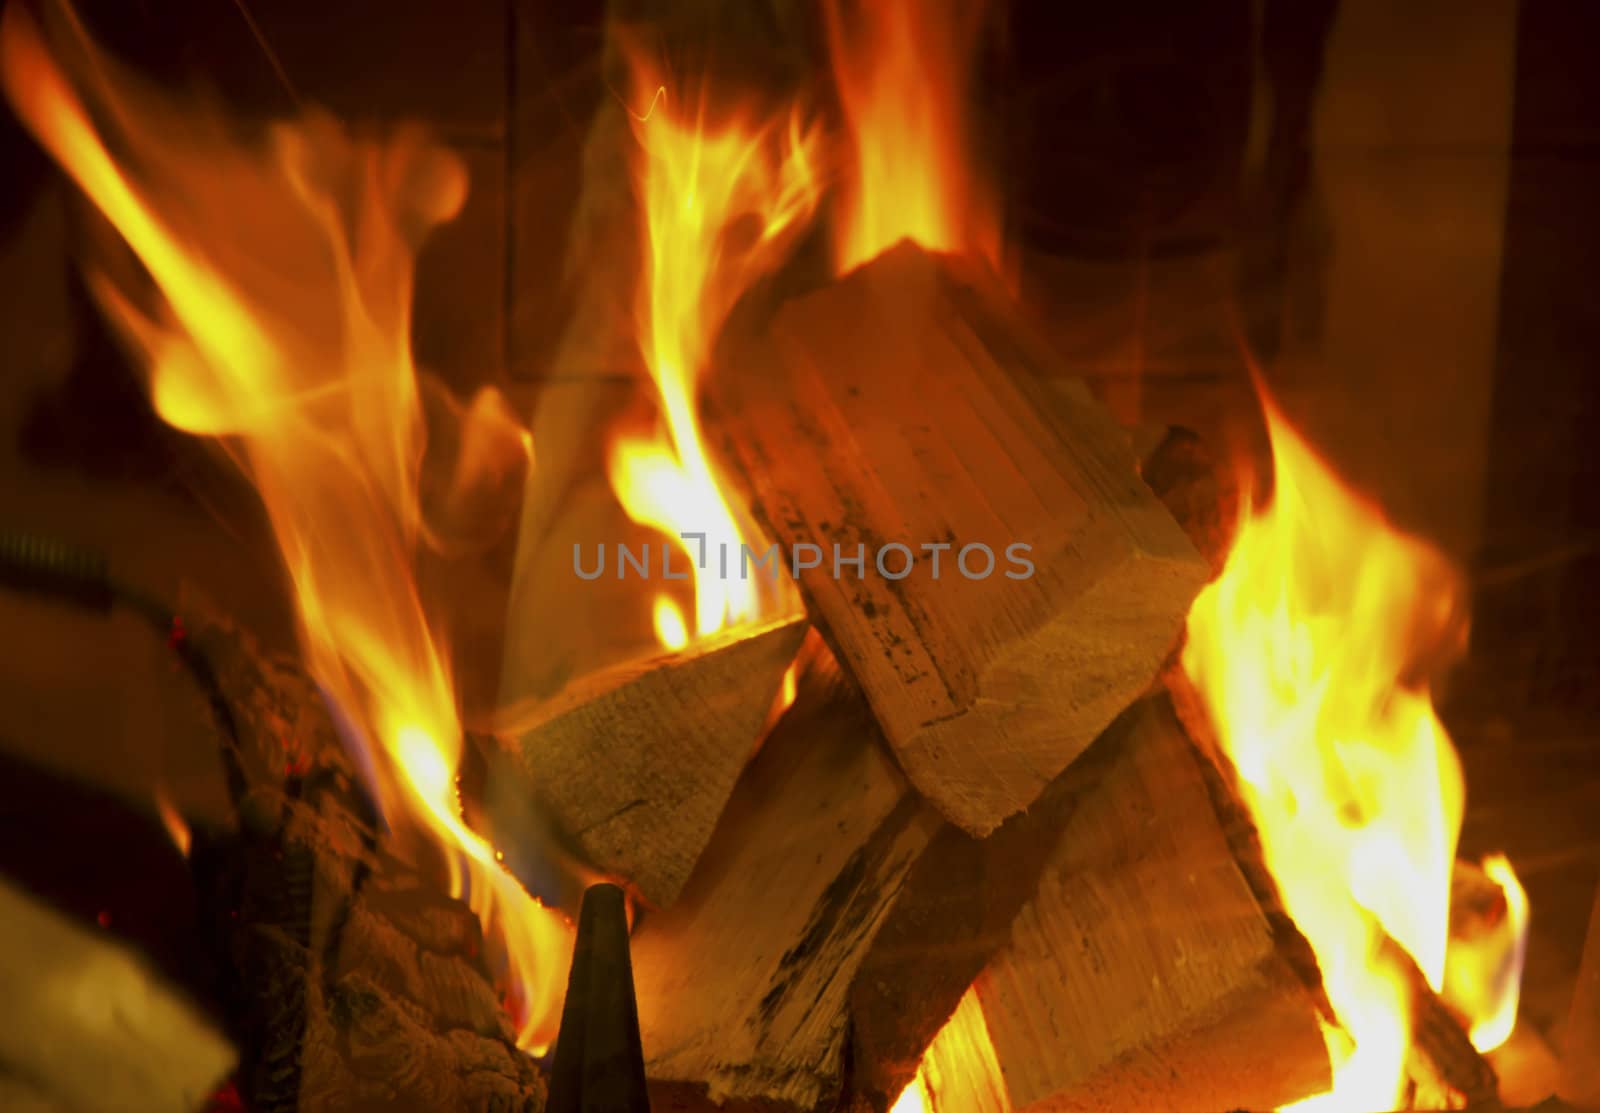 Fire in the fireplace by RawGroup